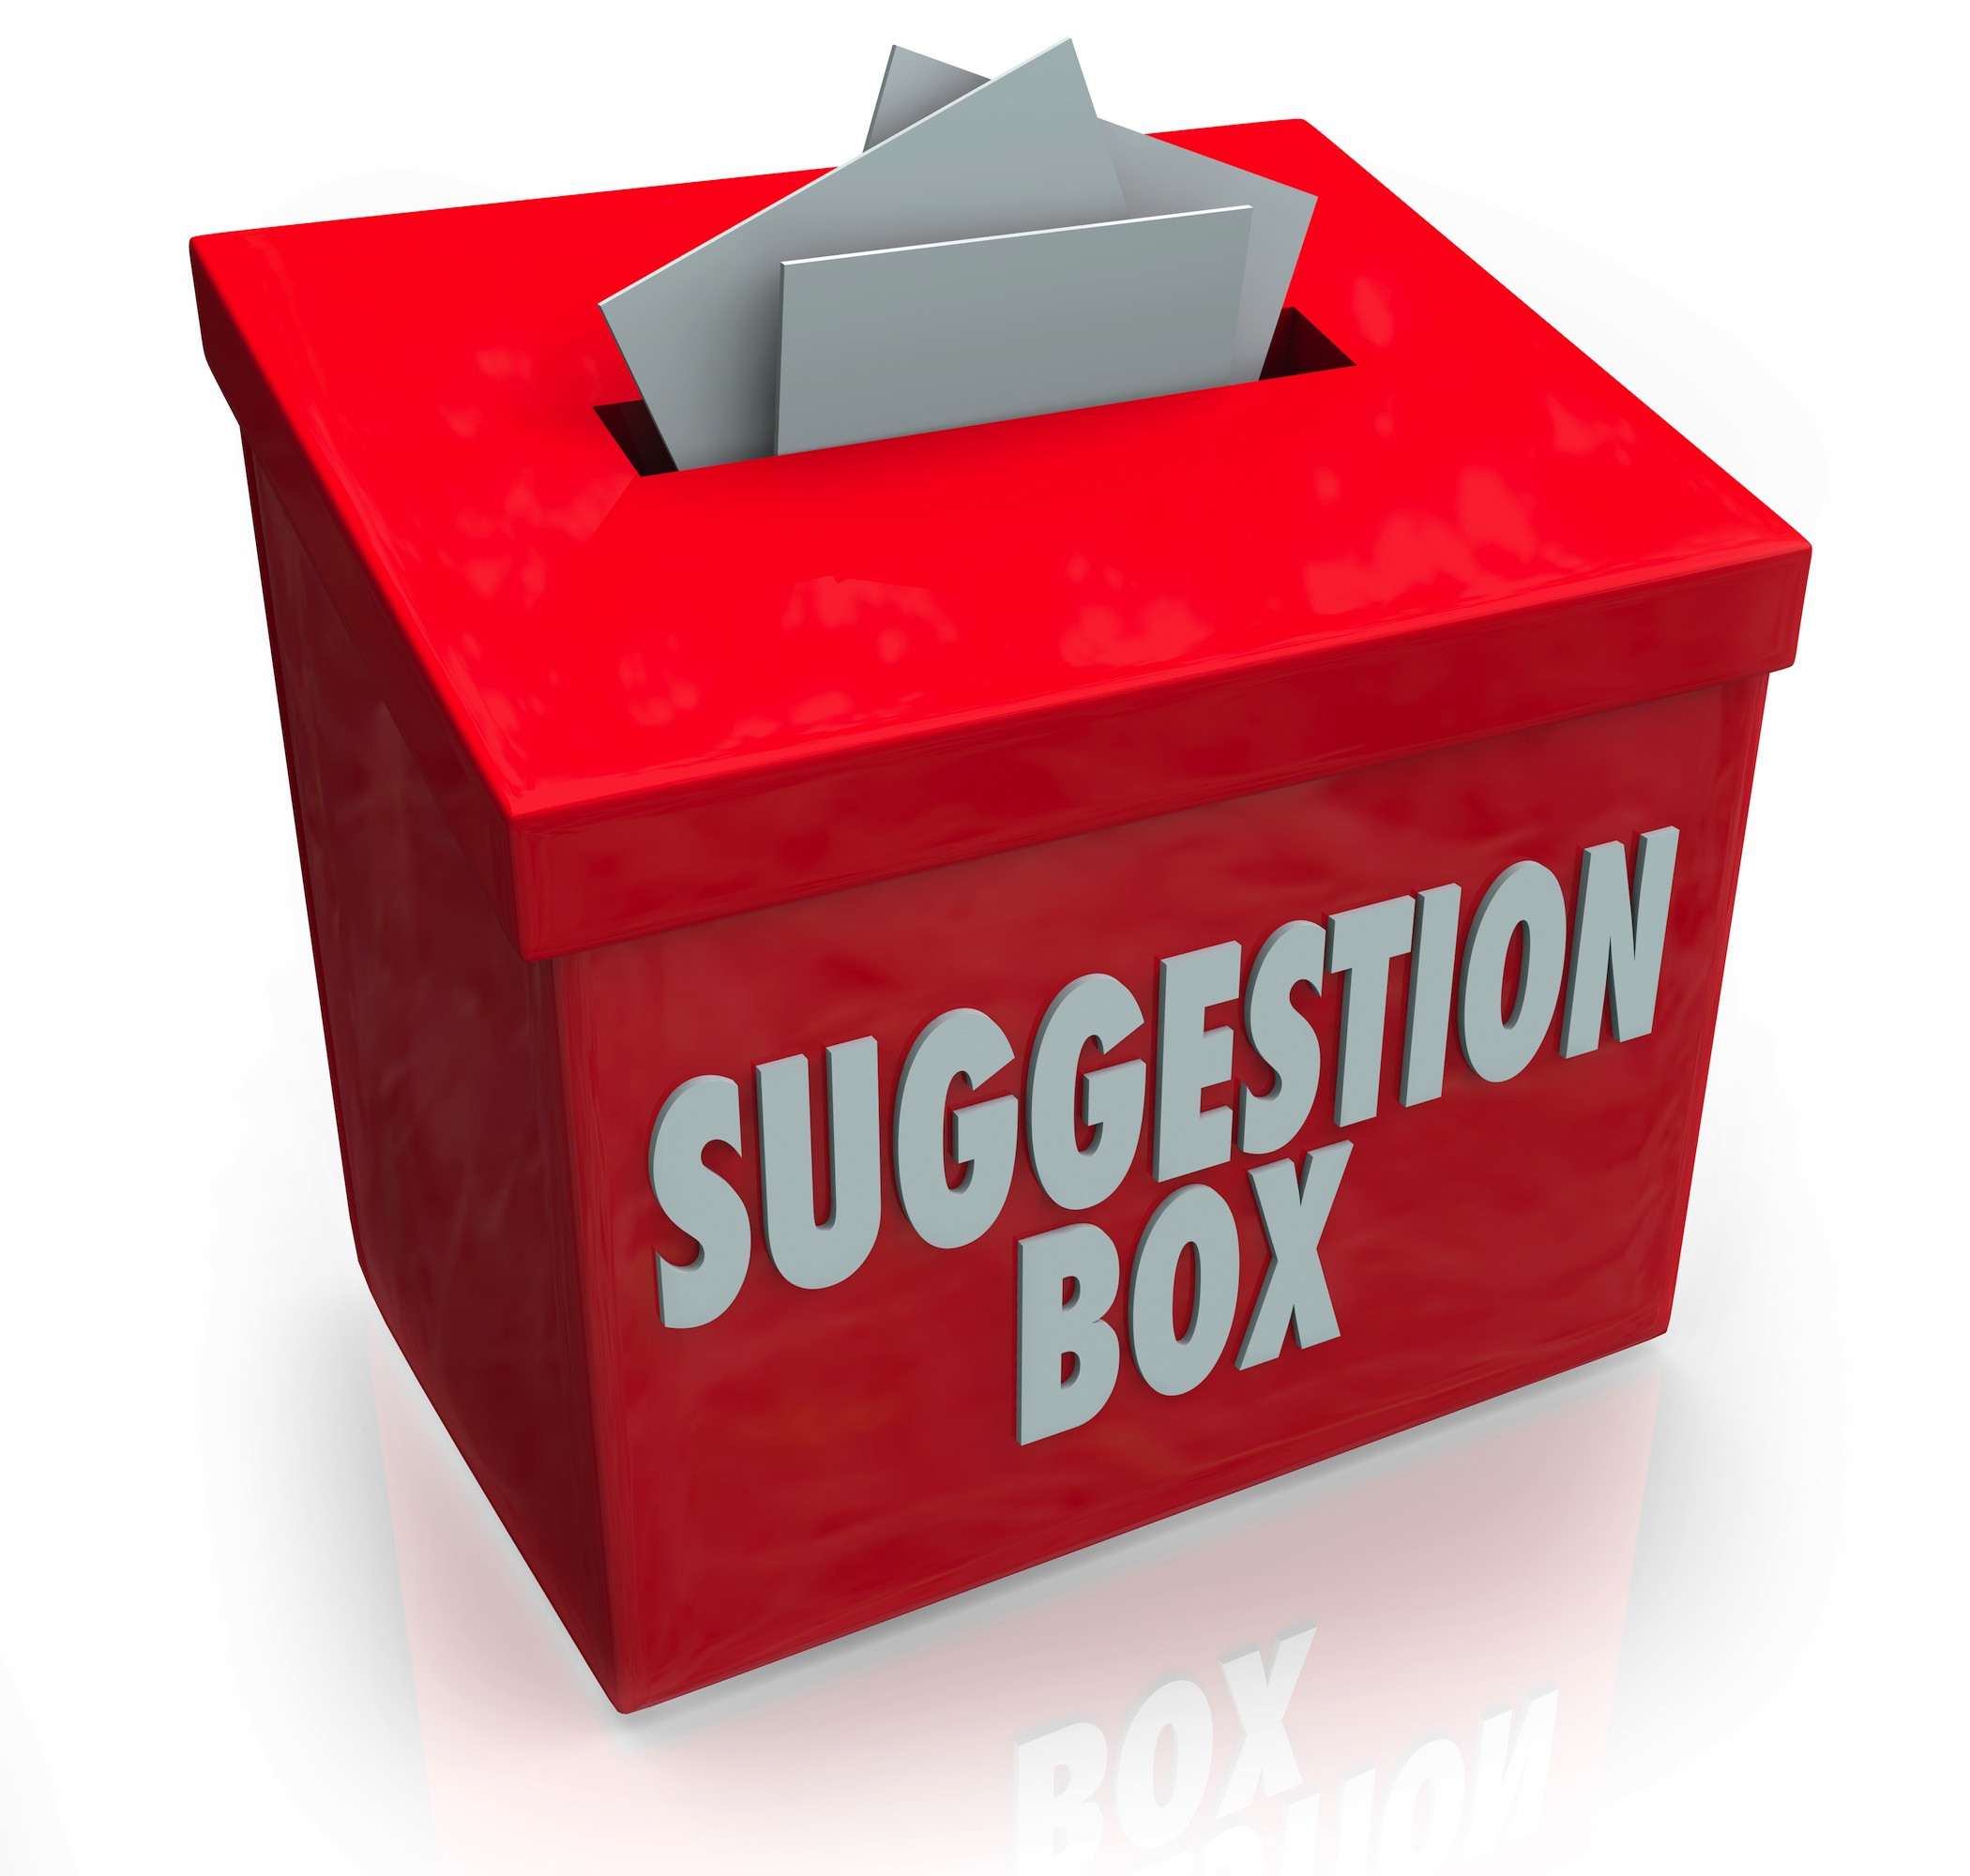 DIY Suggestion Box
 From the Suggestion Box Meeples Games